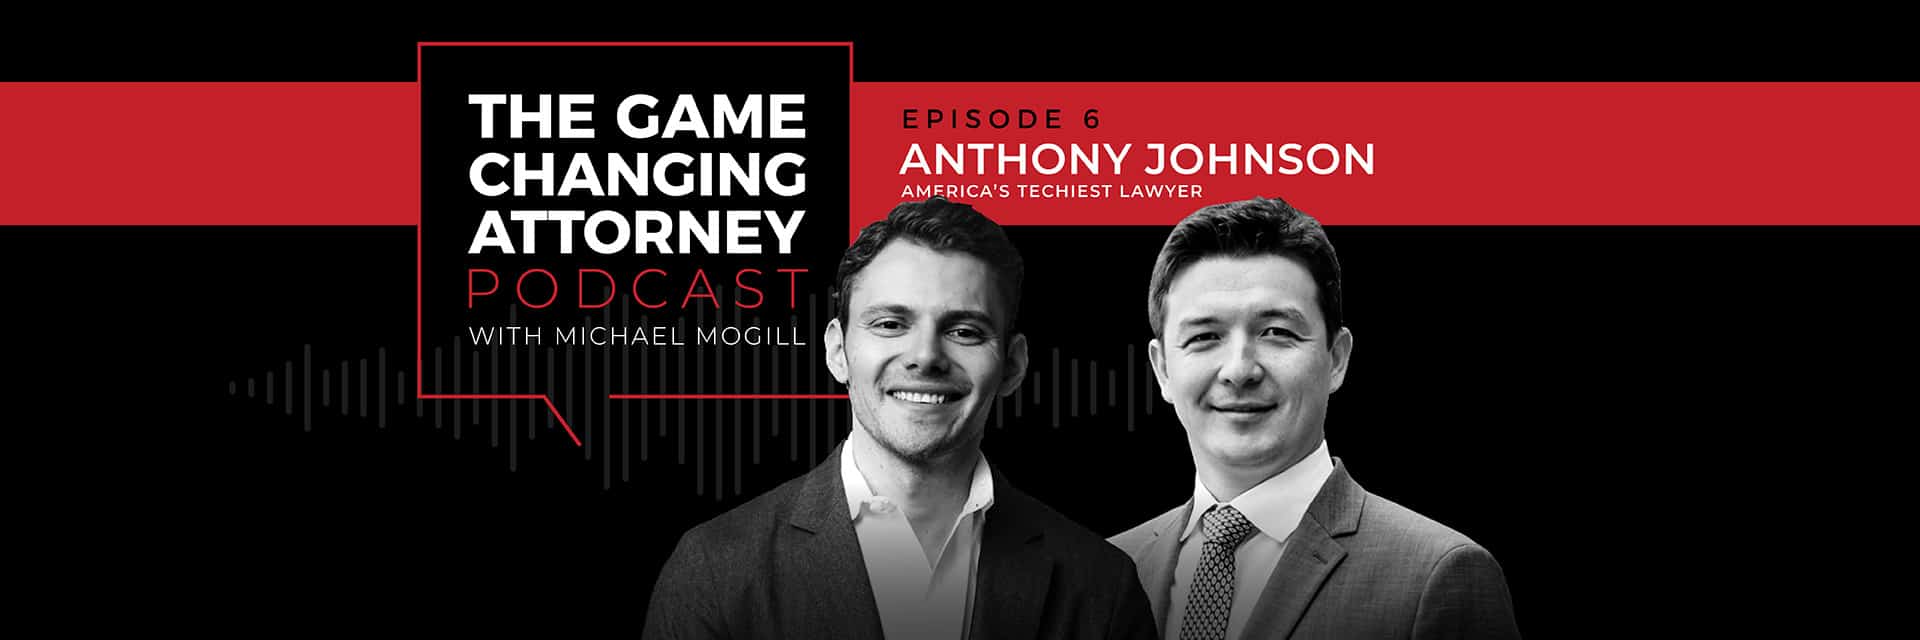 Anthony Johnson on The Game Changing Attorney Podcast Desktop